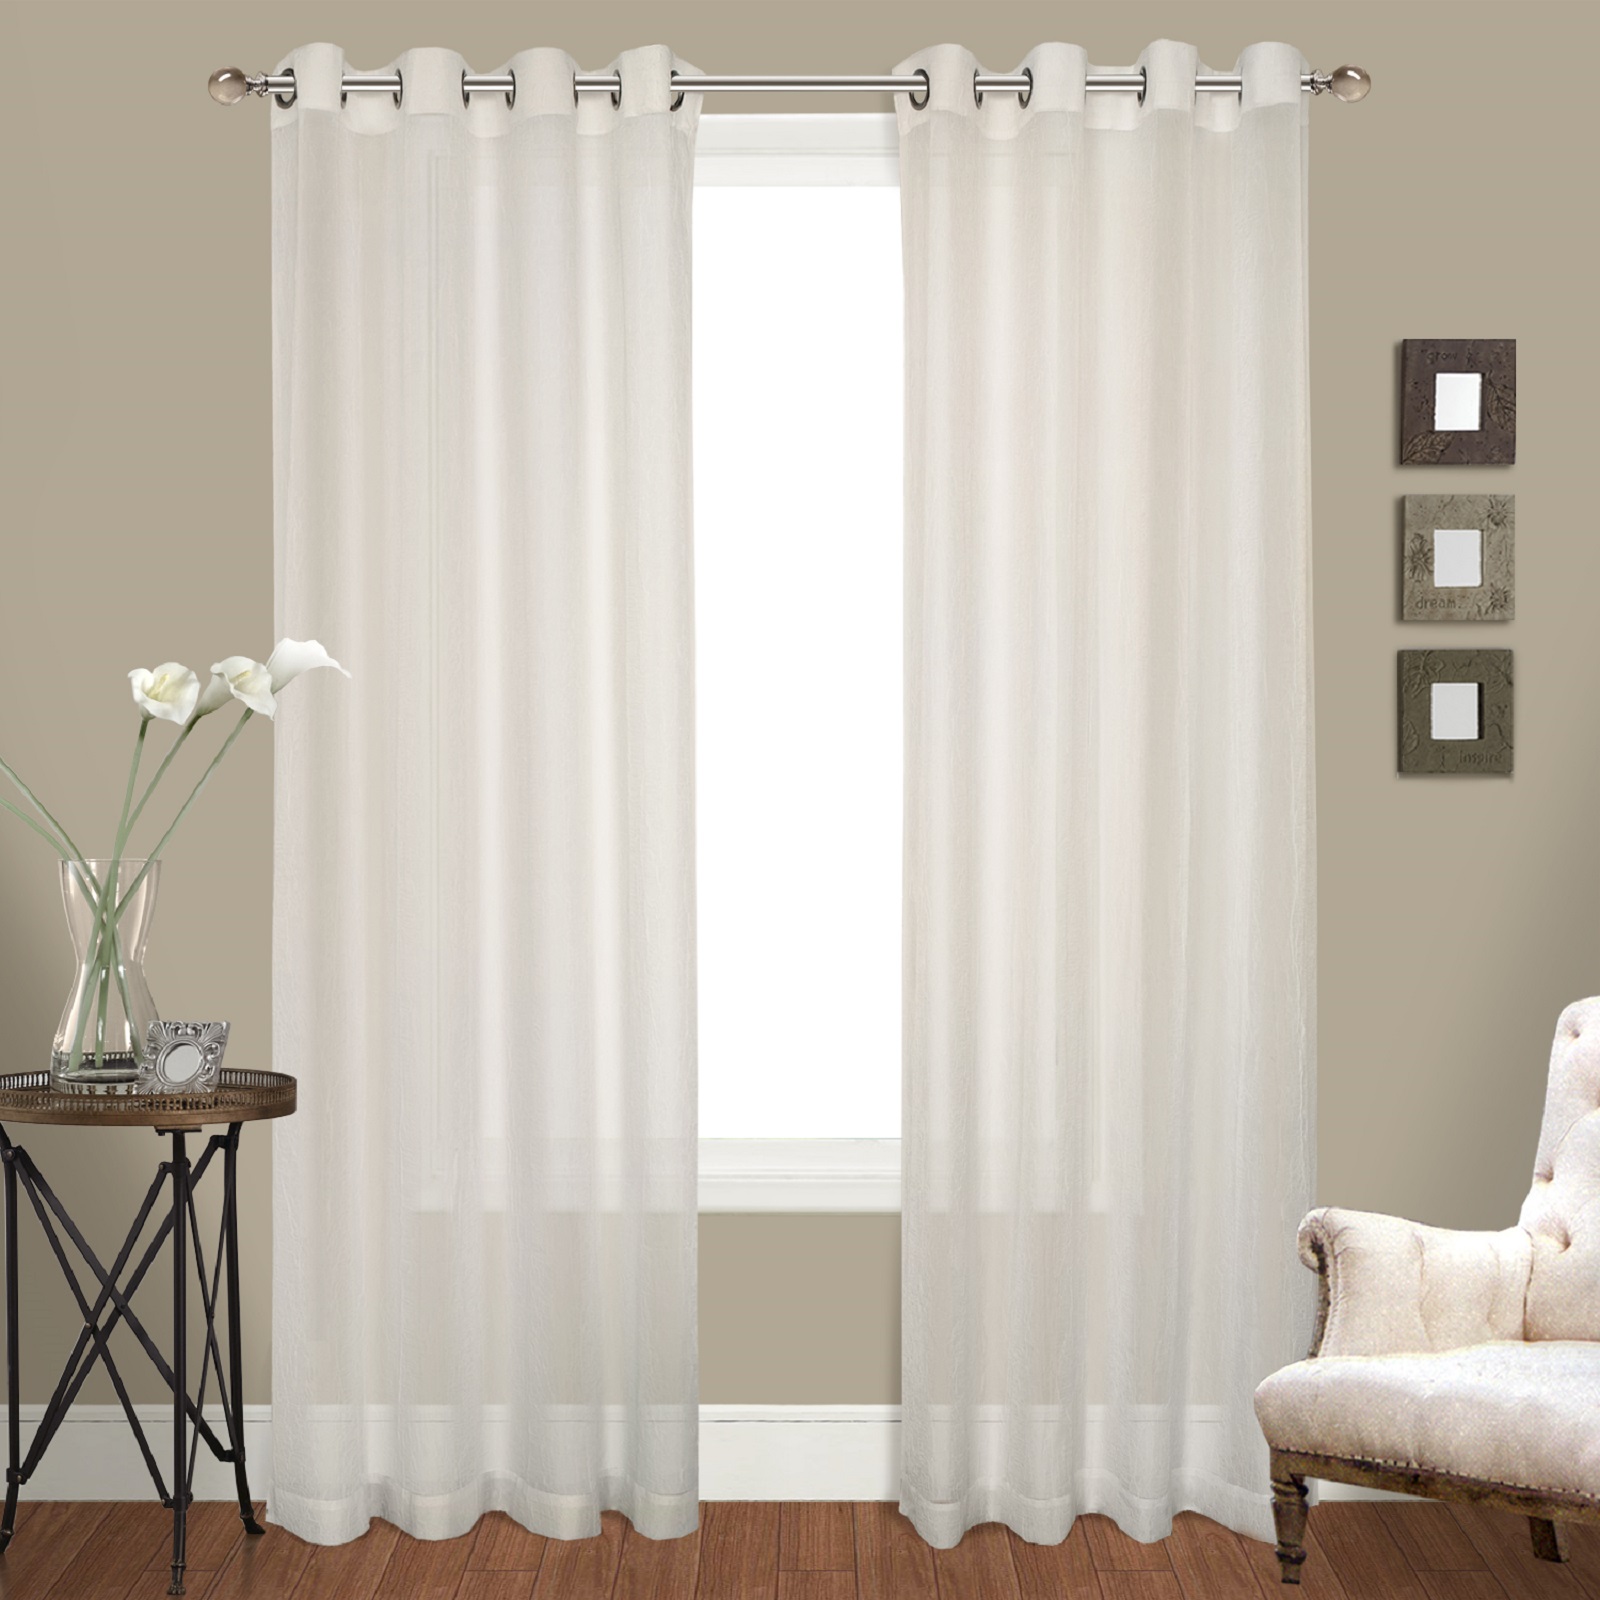 Long Sheer Curtain Panels Southwestern Curtains and V